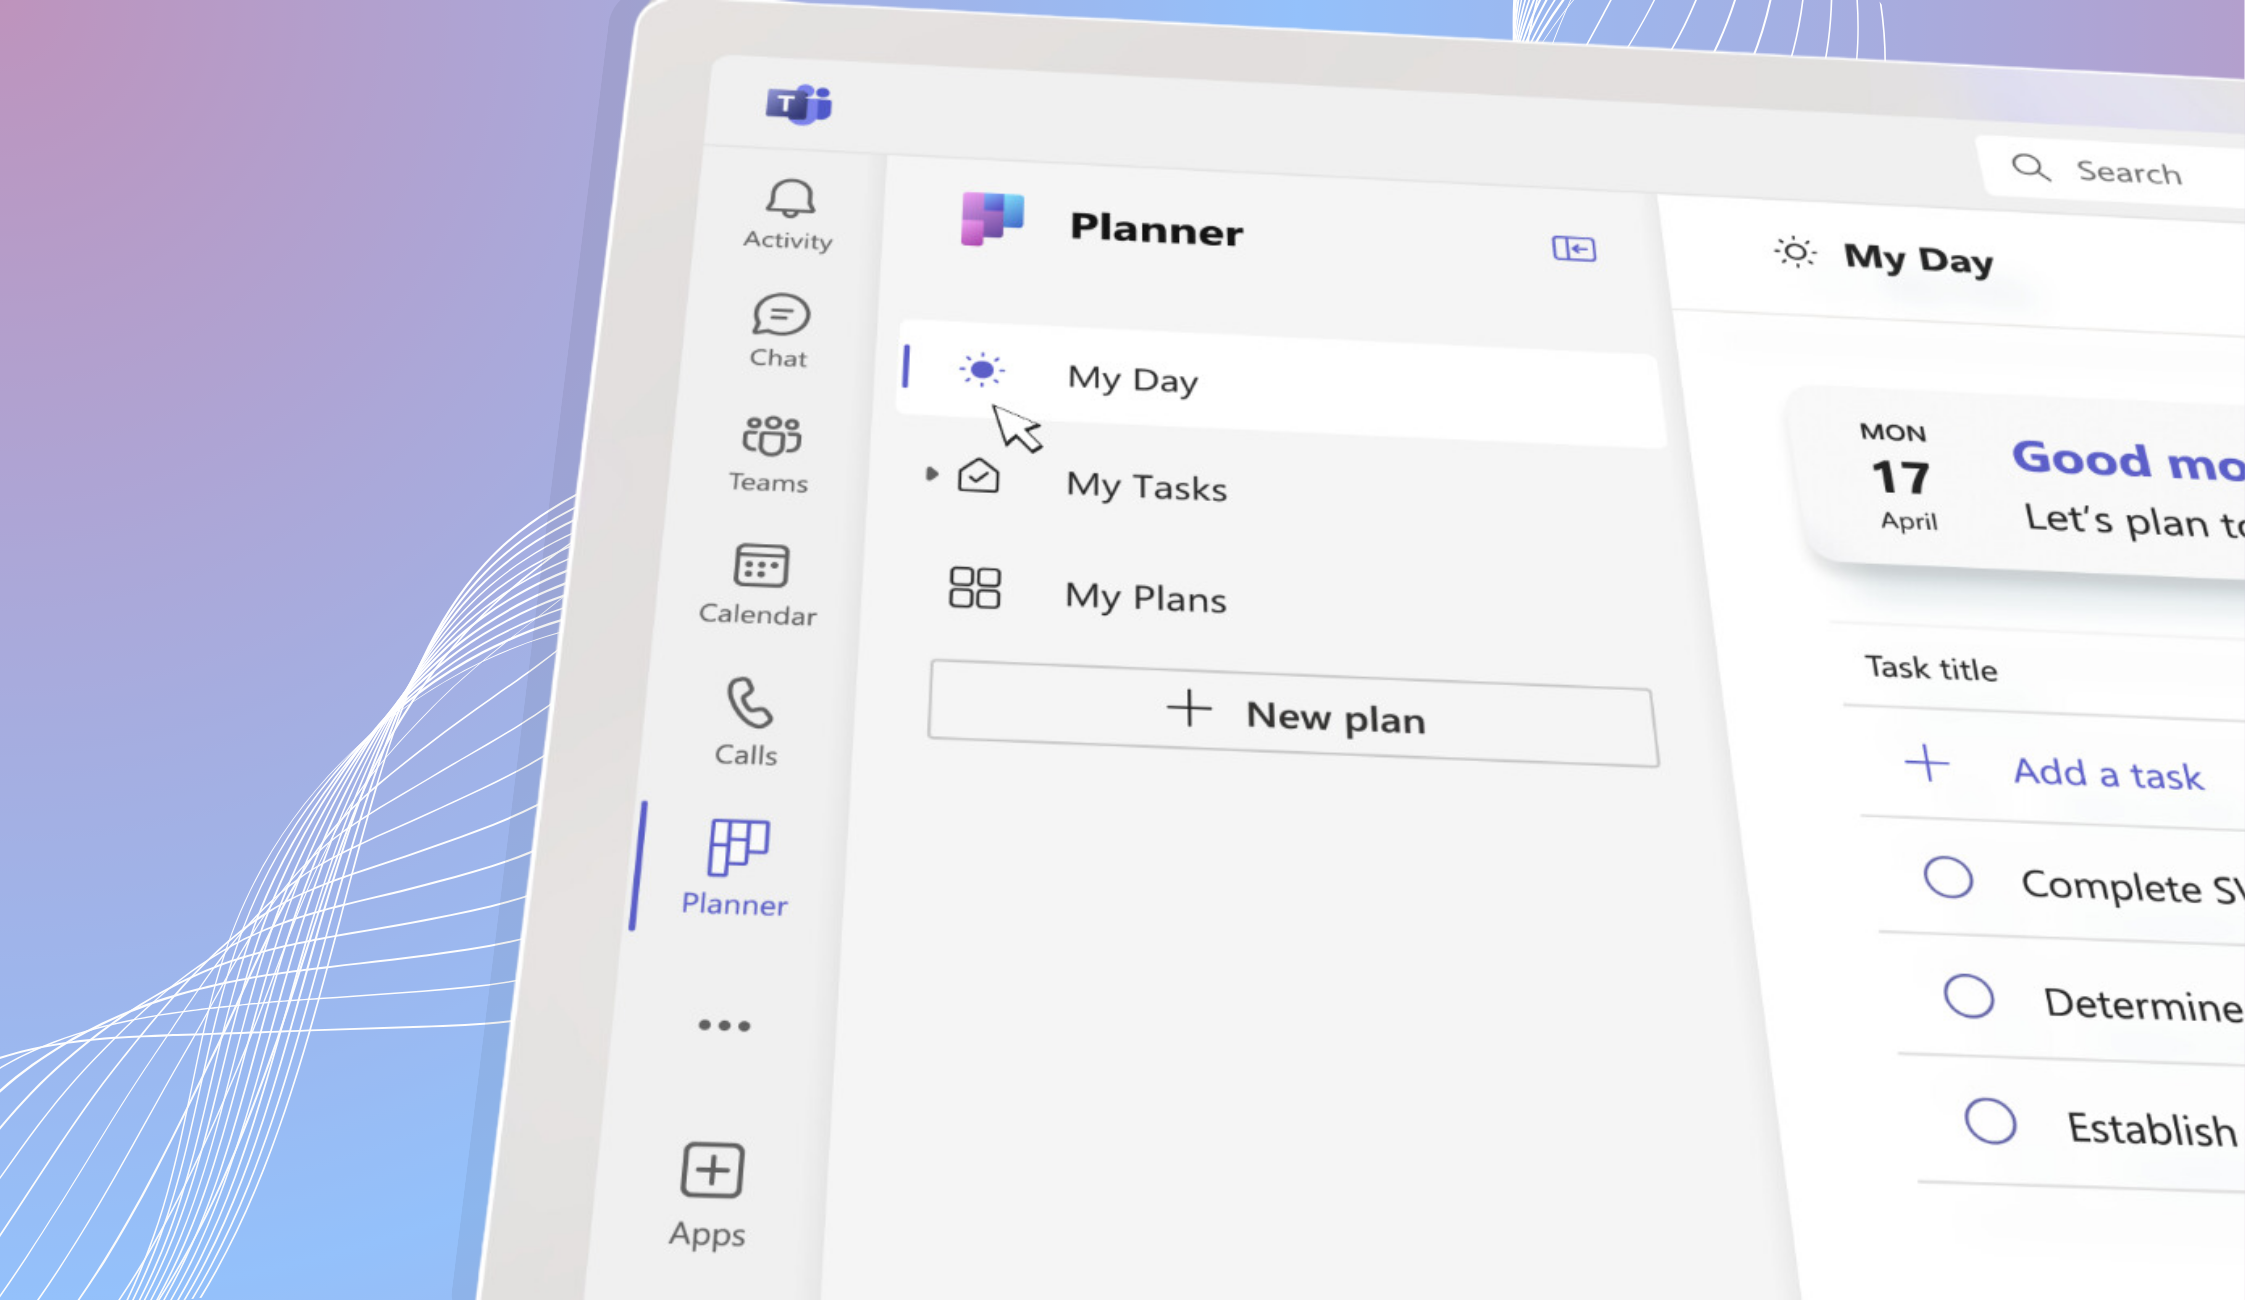 The new planner screen on a purple gradient background.